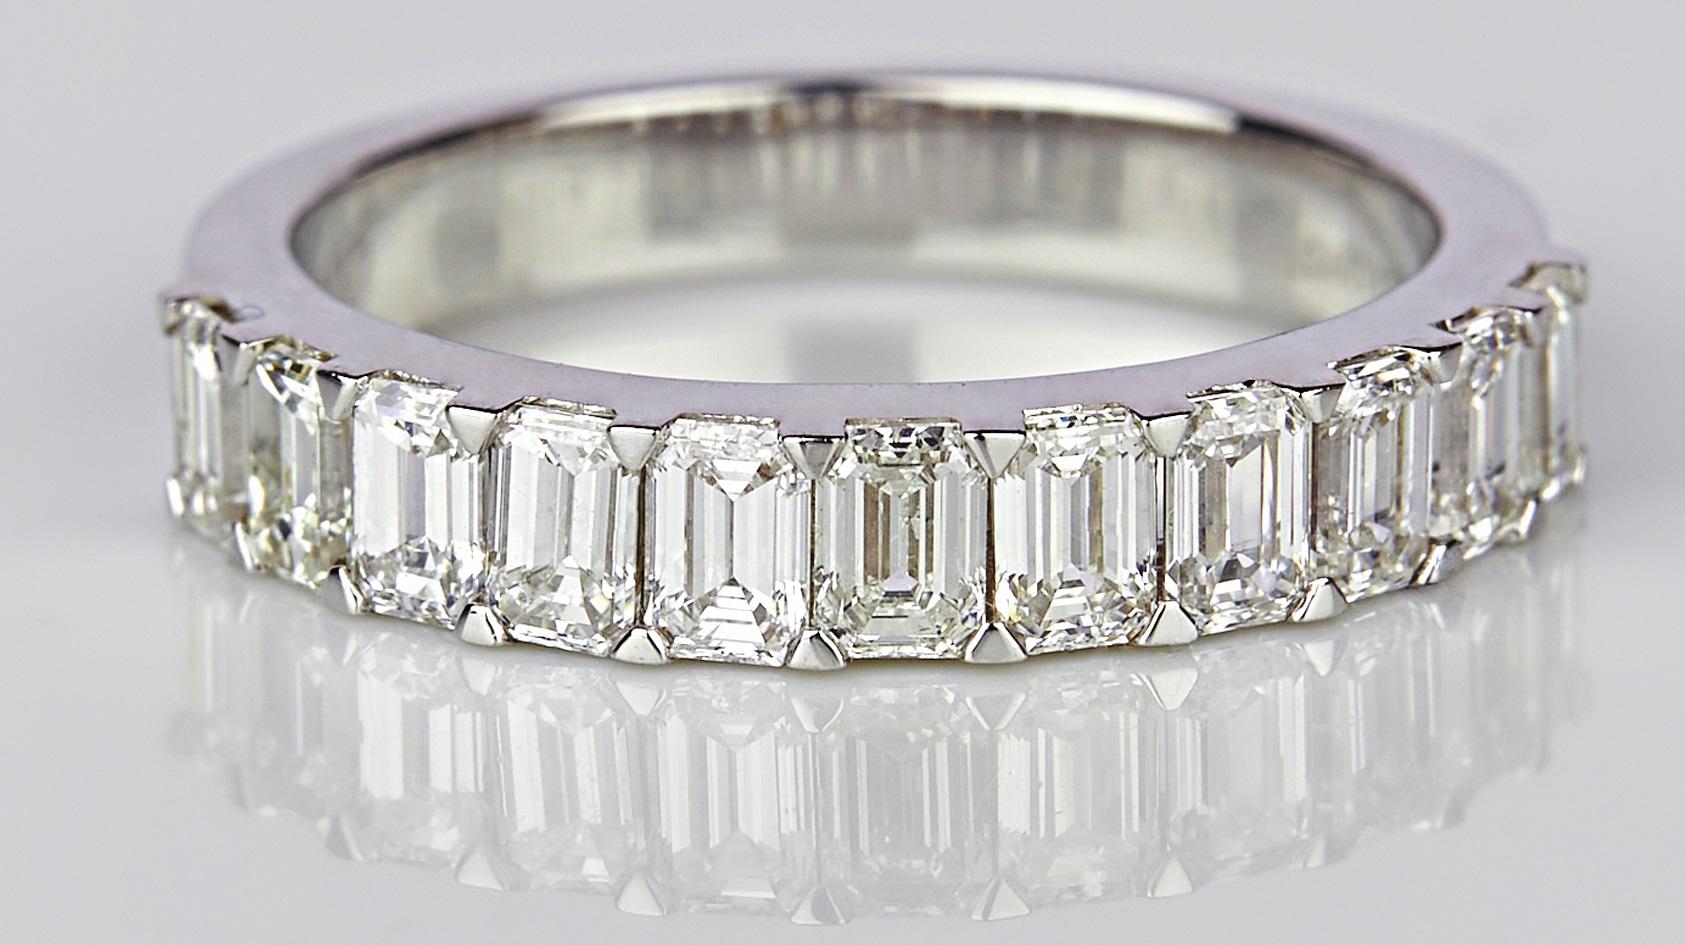 A Classic Diamond band set in 4.36 grams of 18K White Gold with 11 Emerald cut diamonds studded around in SI/GH quality and color weighing 1.47 carats. 

These diamonds have been carefully picked and selected from authentic sources and complete